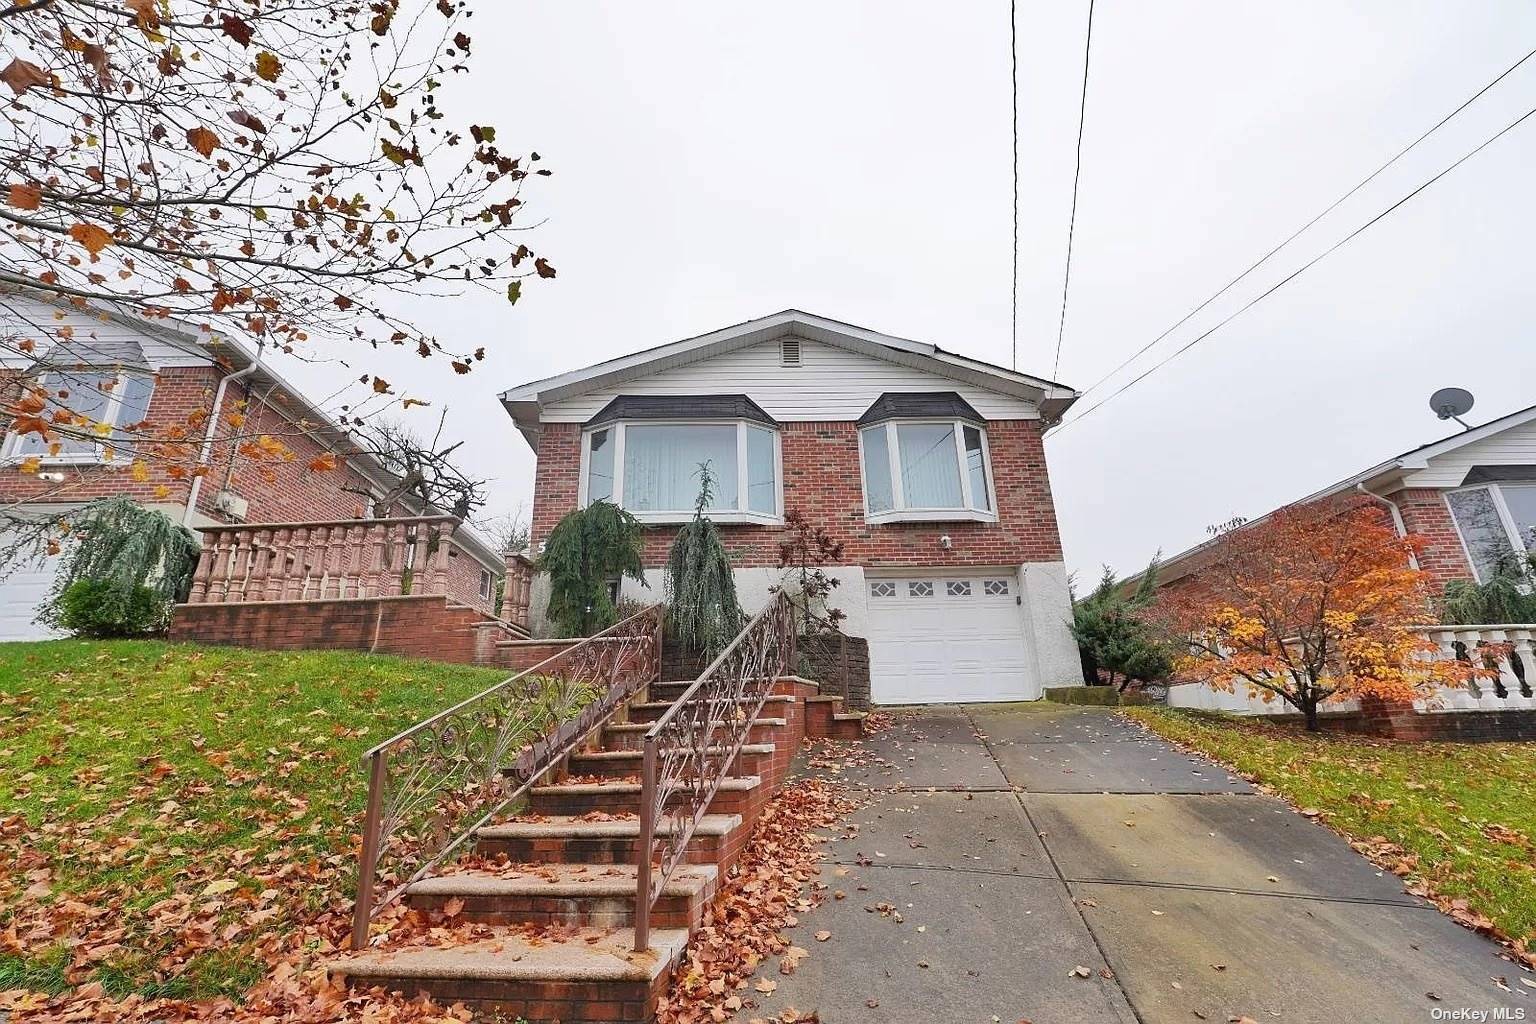 Beautiful 2 Story Single Dwelling Home In The Todt Hill Section Of Staten Island.